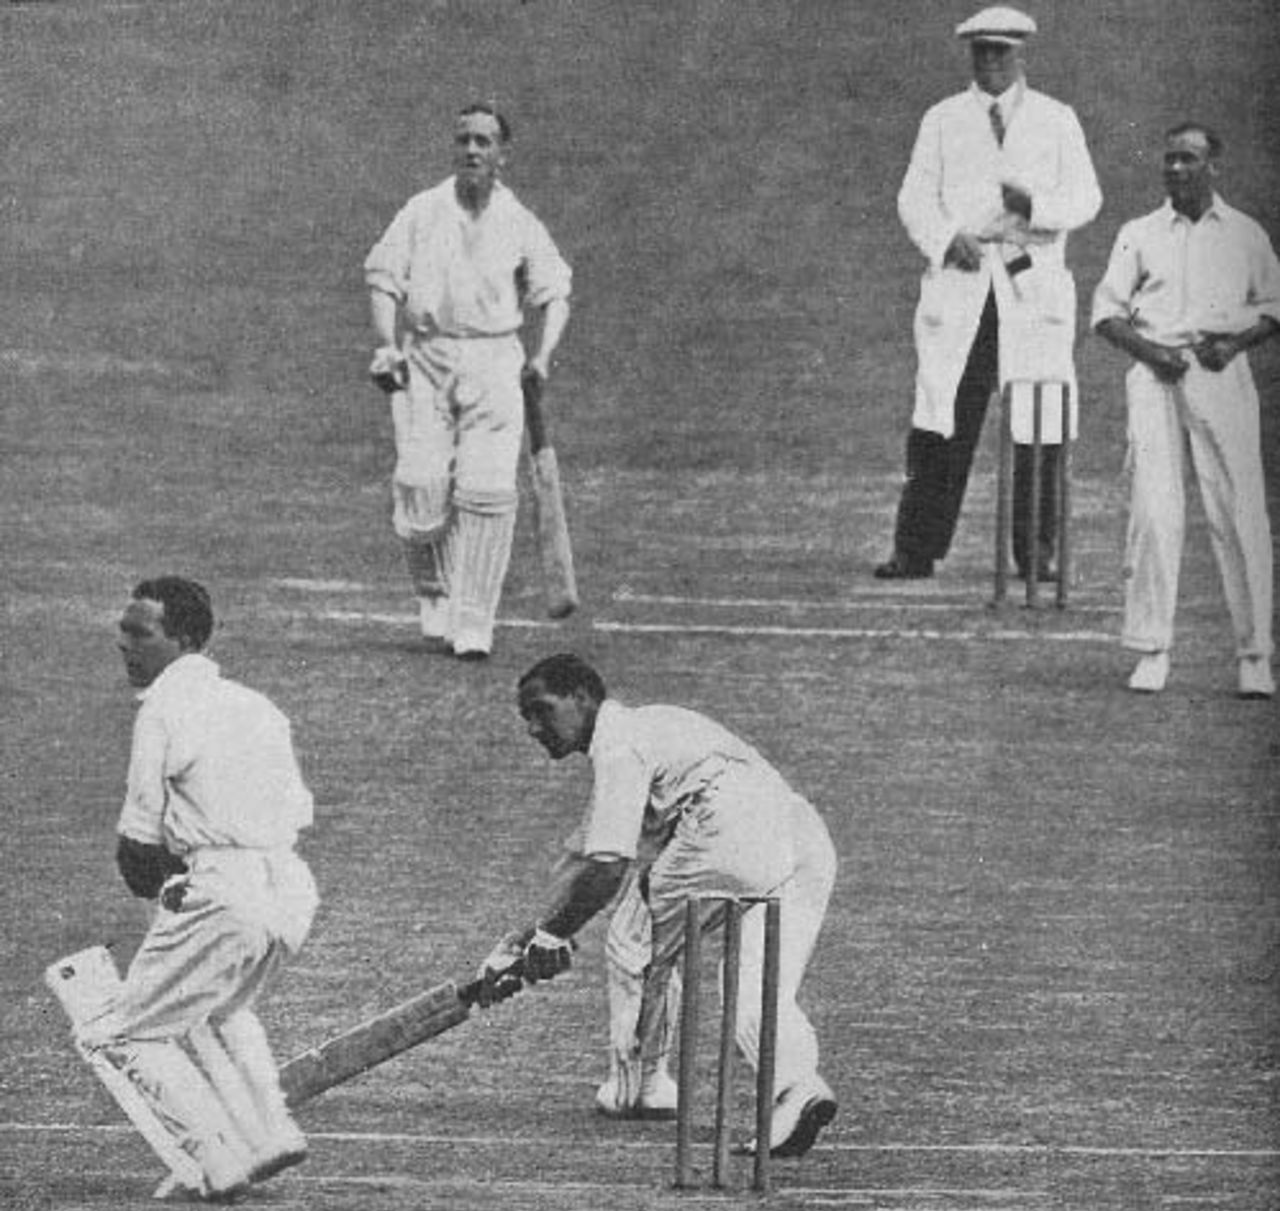 Herbert Sutcliffe plays the shot that gave him and Percy Holmes their 555 first-wicket stand, Essex v Yorkshire, Leyton, June 16, 1932